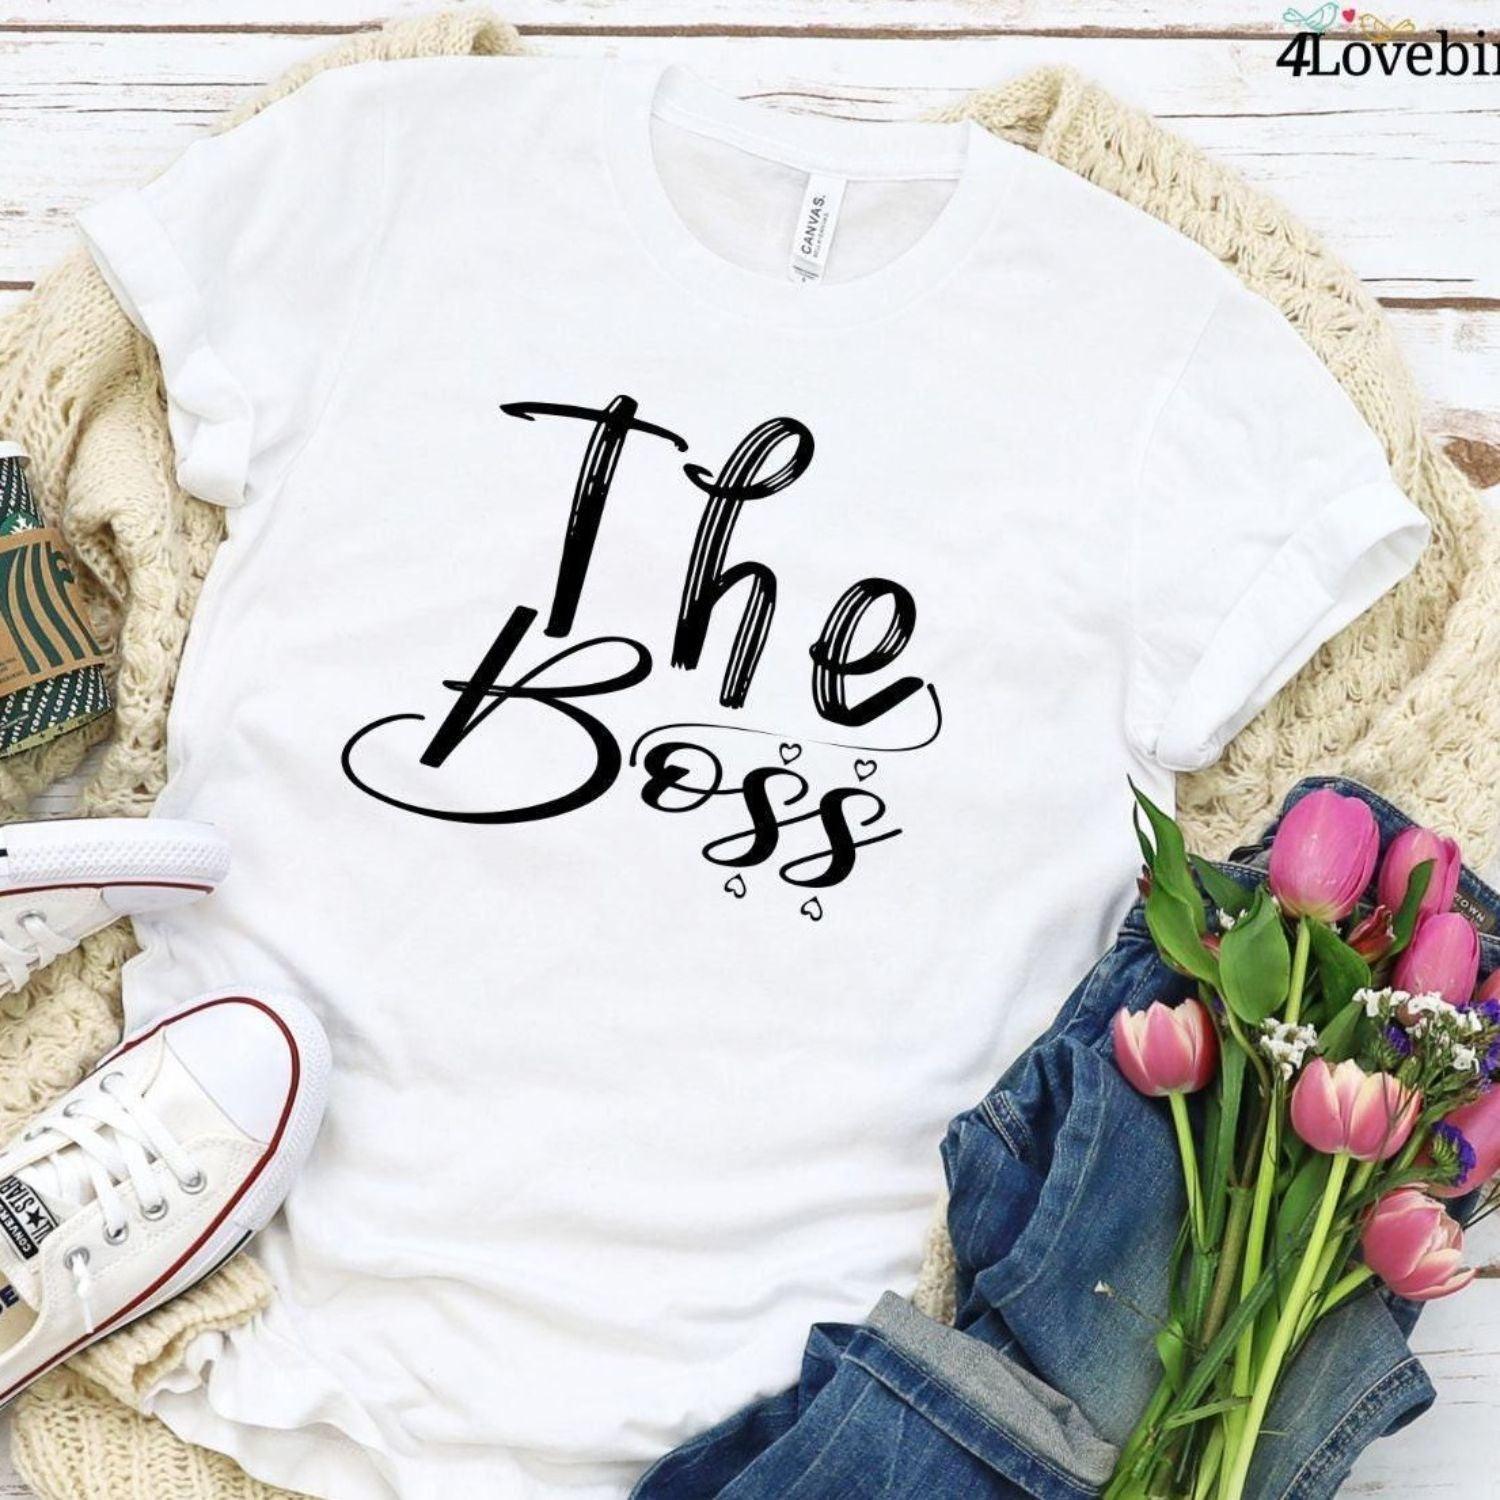 The Boss & The Real Boss Matching Outfits: Fun 'Boss Duo' Couple's Gifts Set - 4Lovebirds